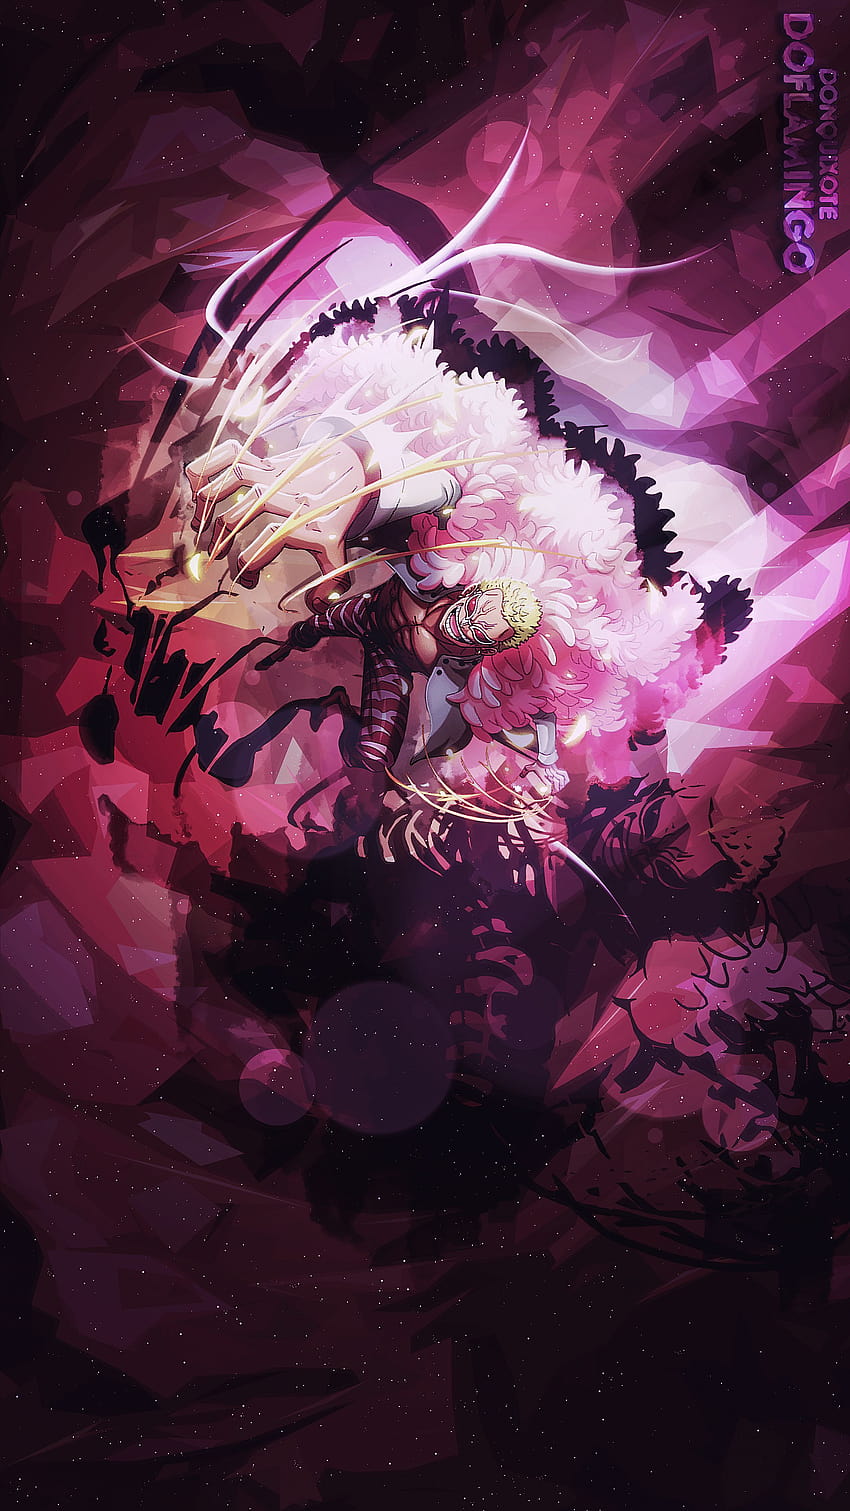 Download Donquixote Doflamingo wallpapers for mobile phone free  Donquixote Doflamingo HD pictures